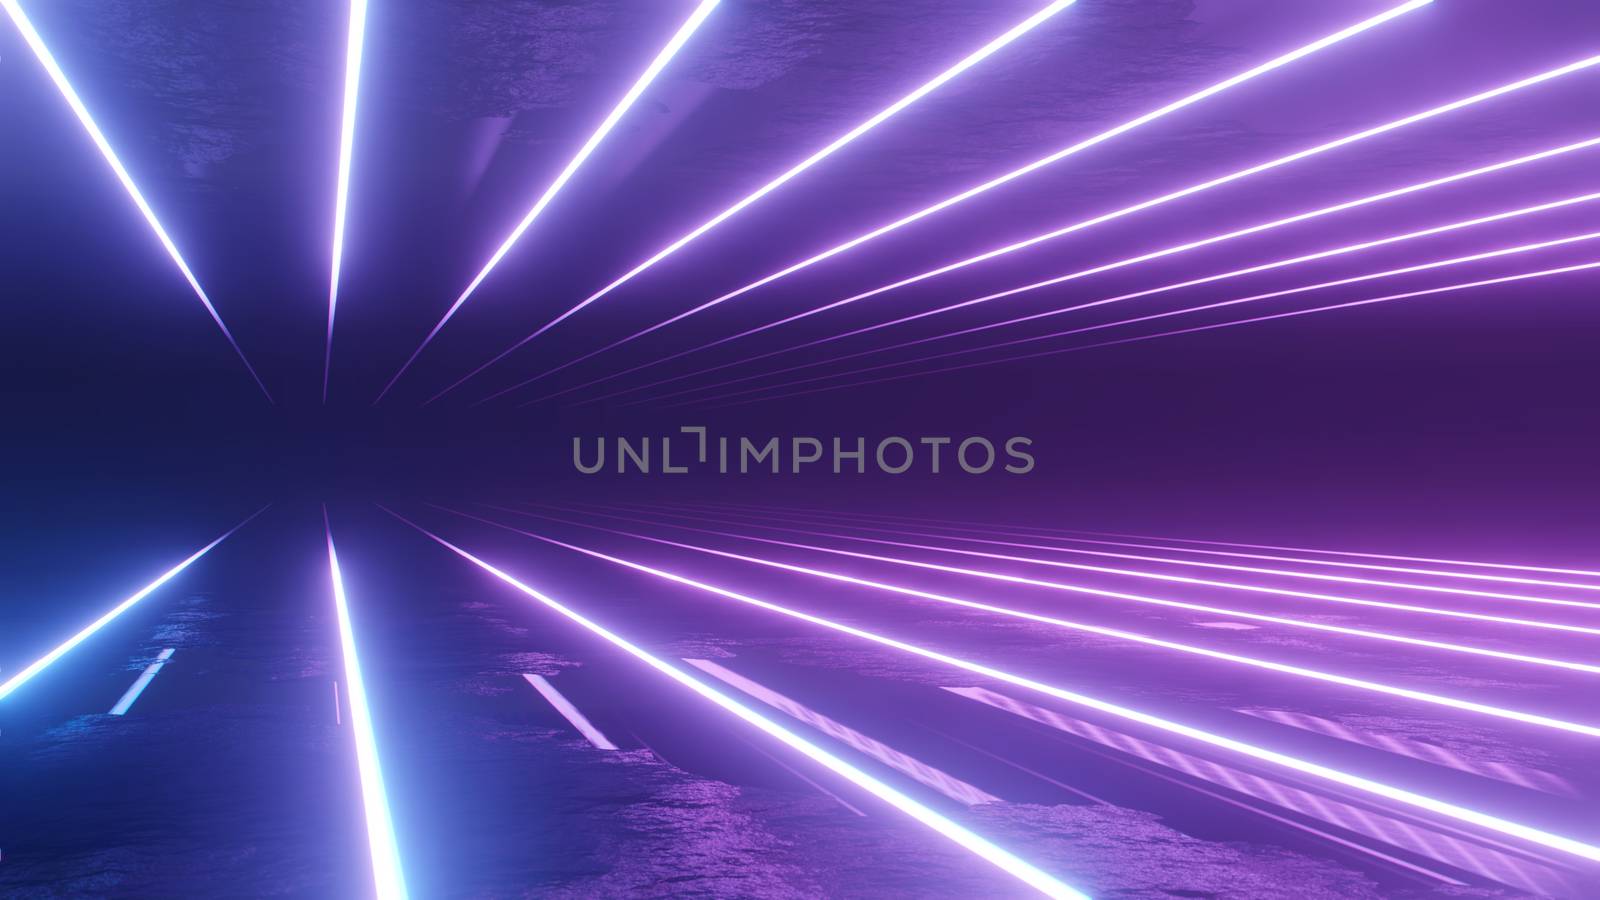 Neon Background 3D Illustration. Glowing Horizontal Lines